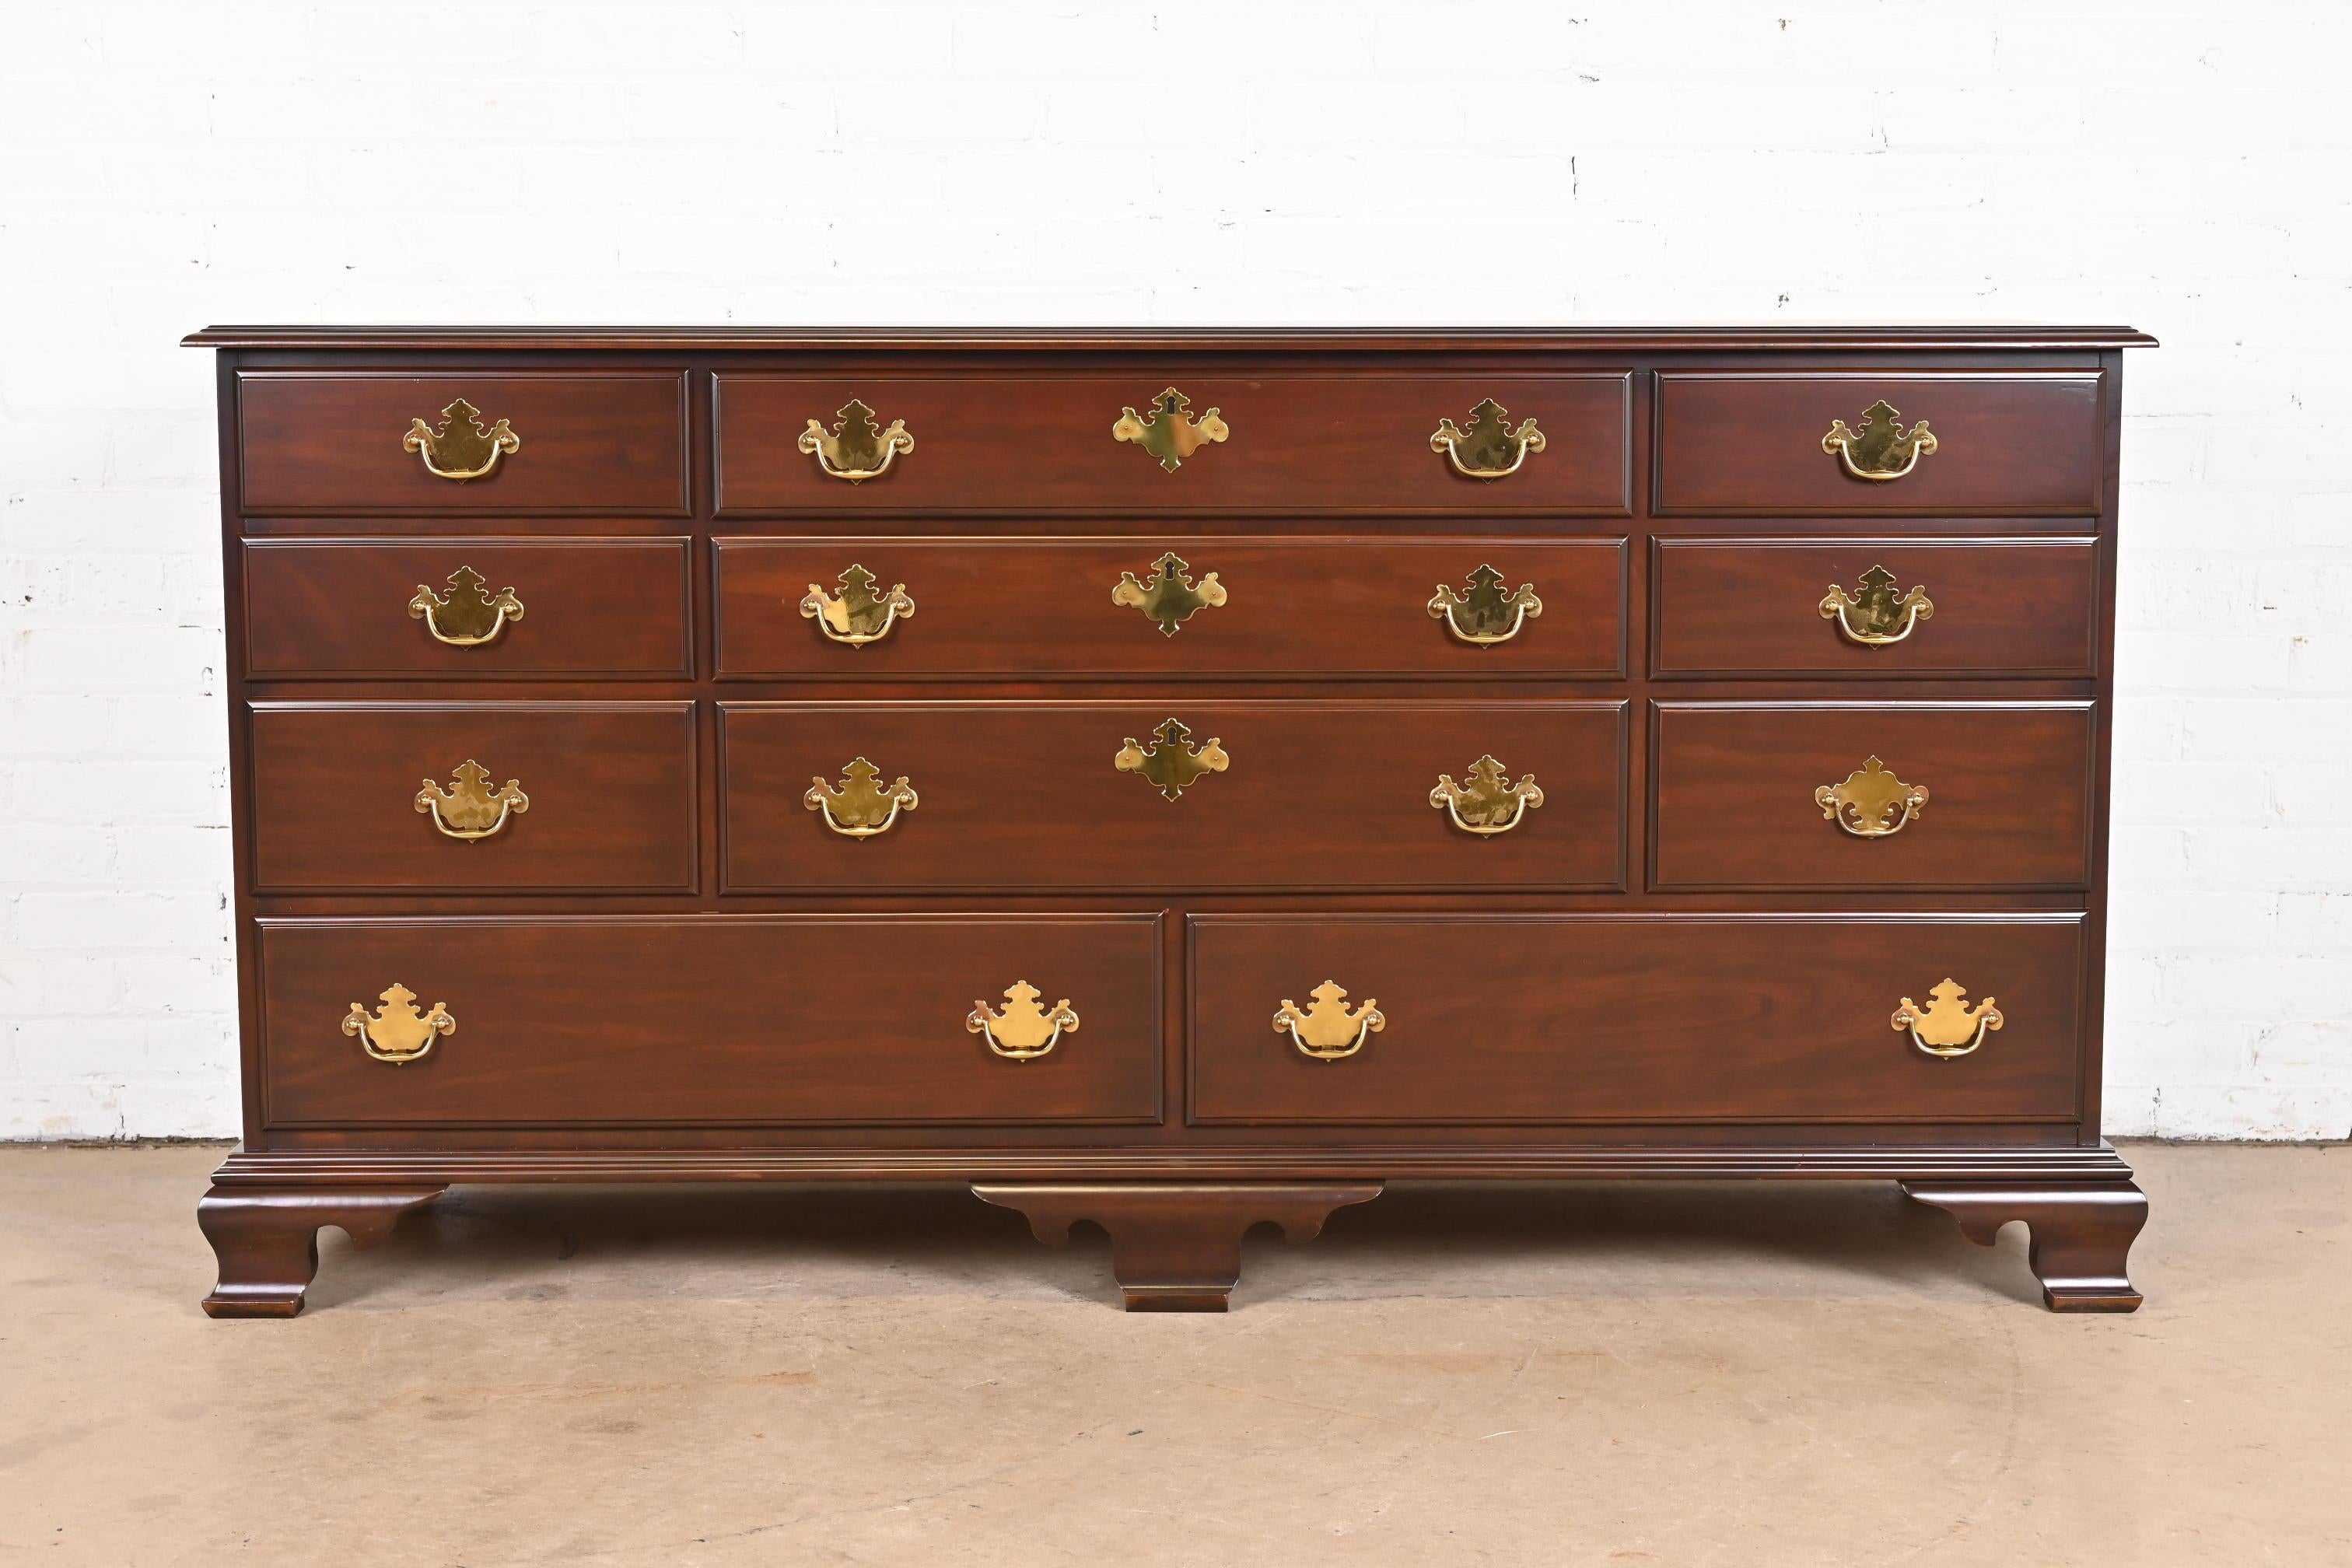 Harden Furniture Georgian Carved Solid Cherry Wood Long Dresser, Newly Restored In Good Condition For Sale In South Bend, IN